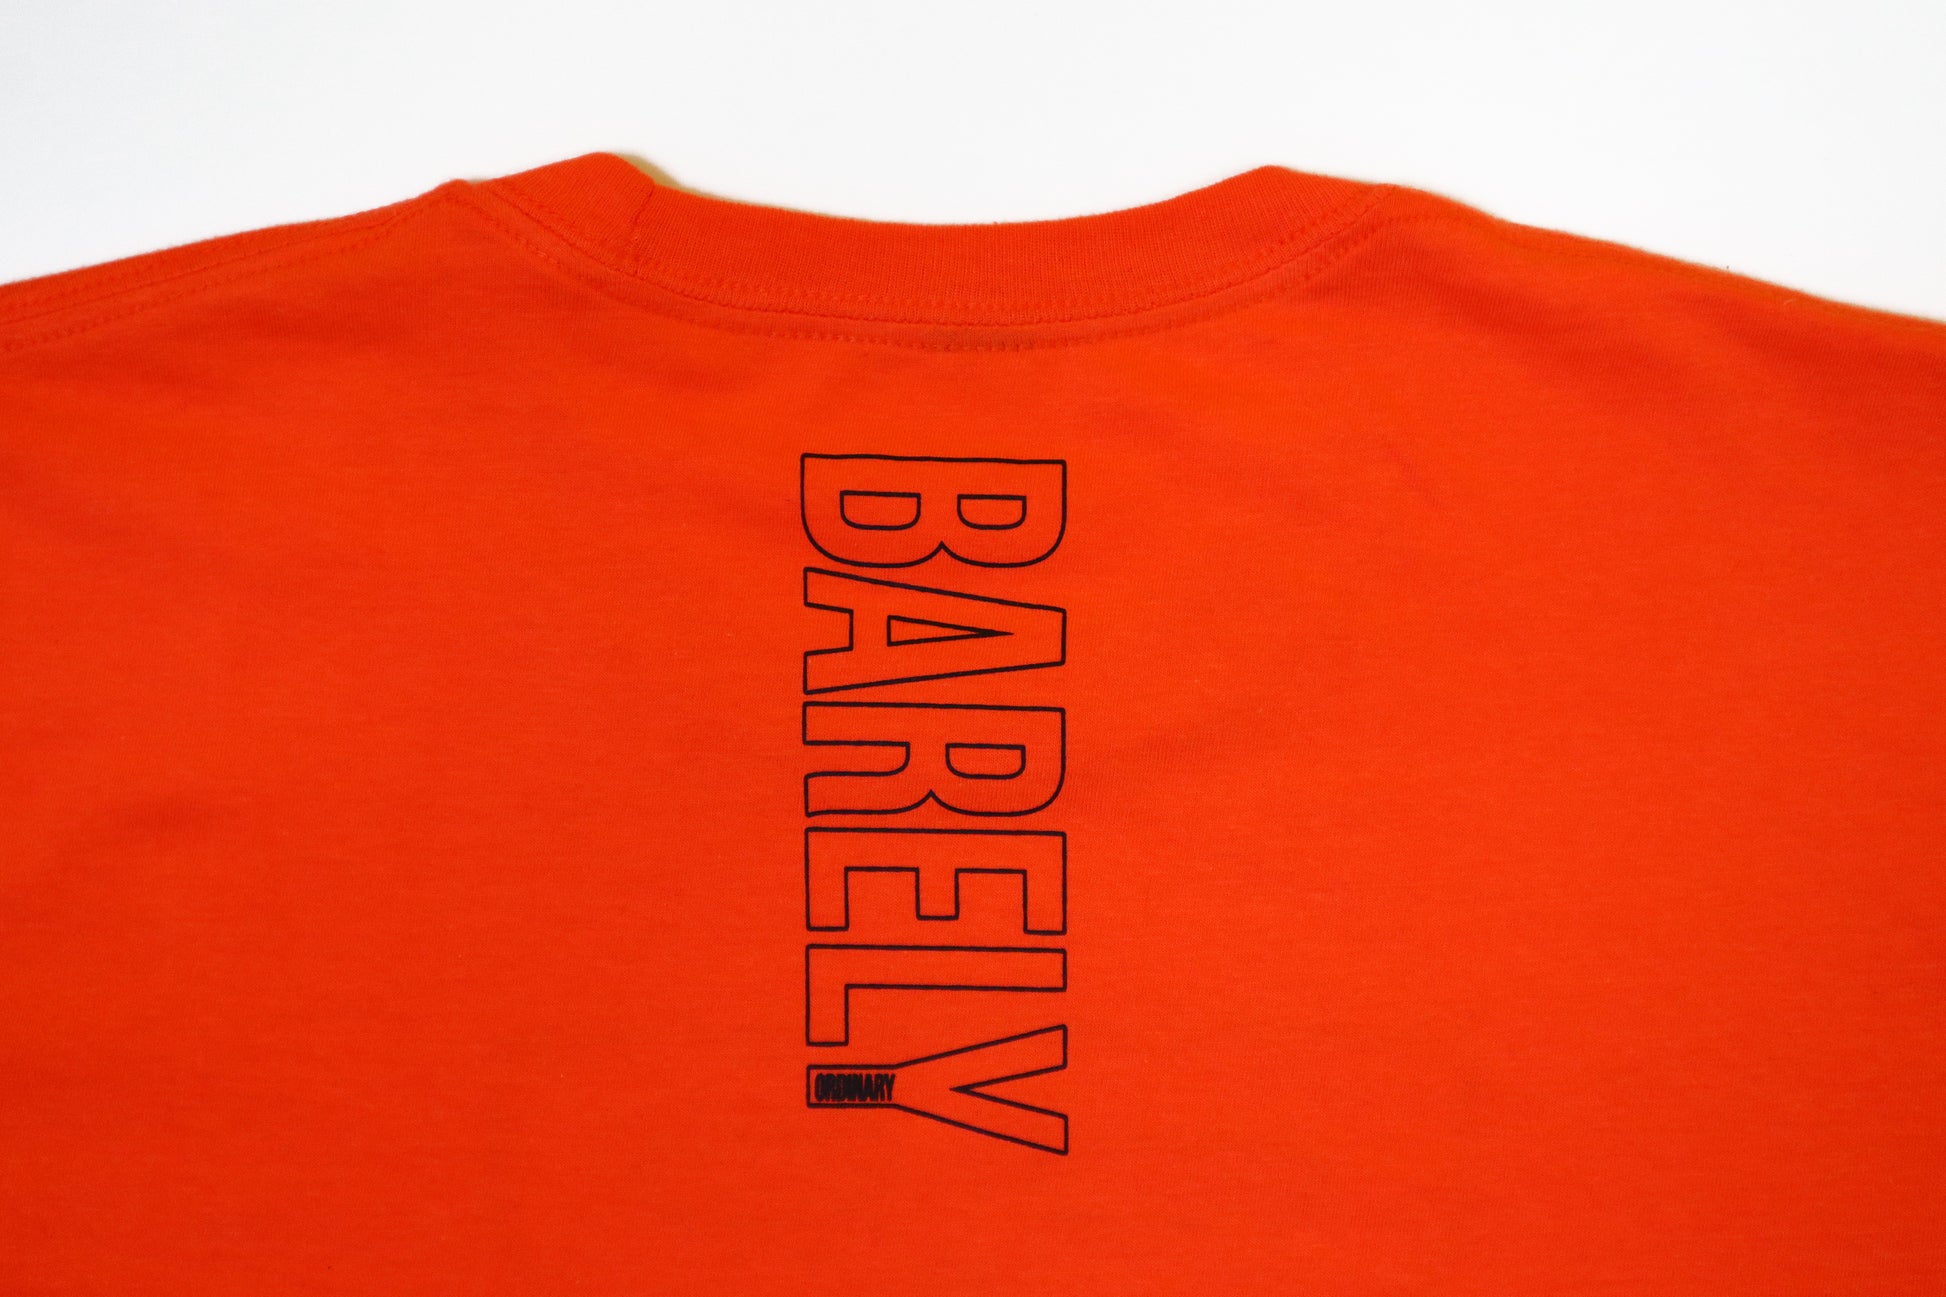 Barely Vertical Logo Outline Tee - Barely Ordinary